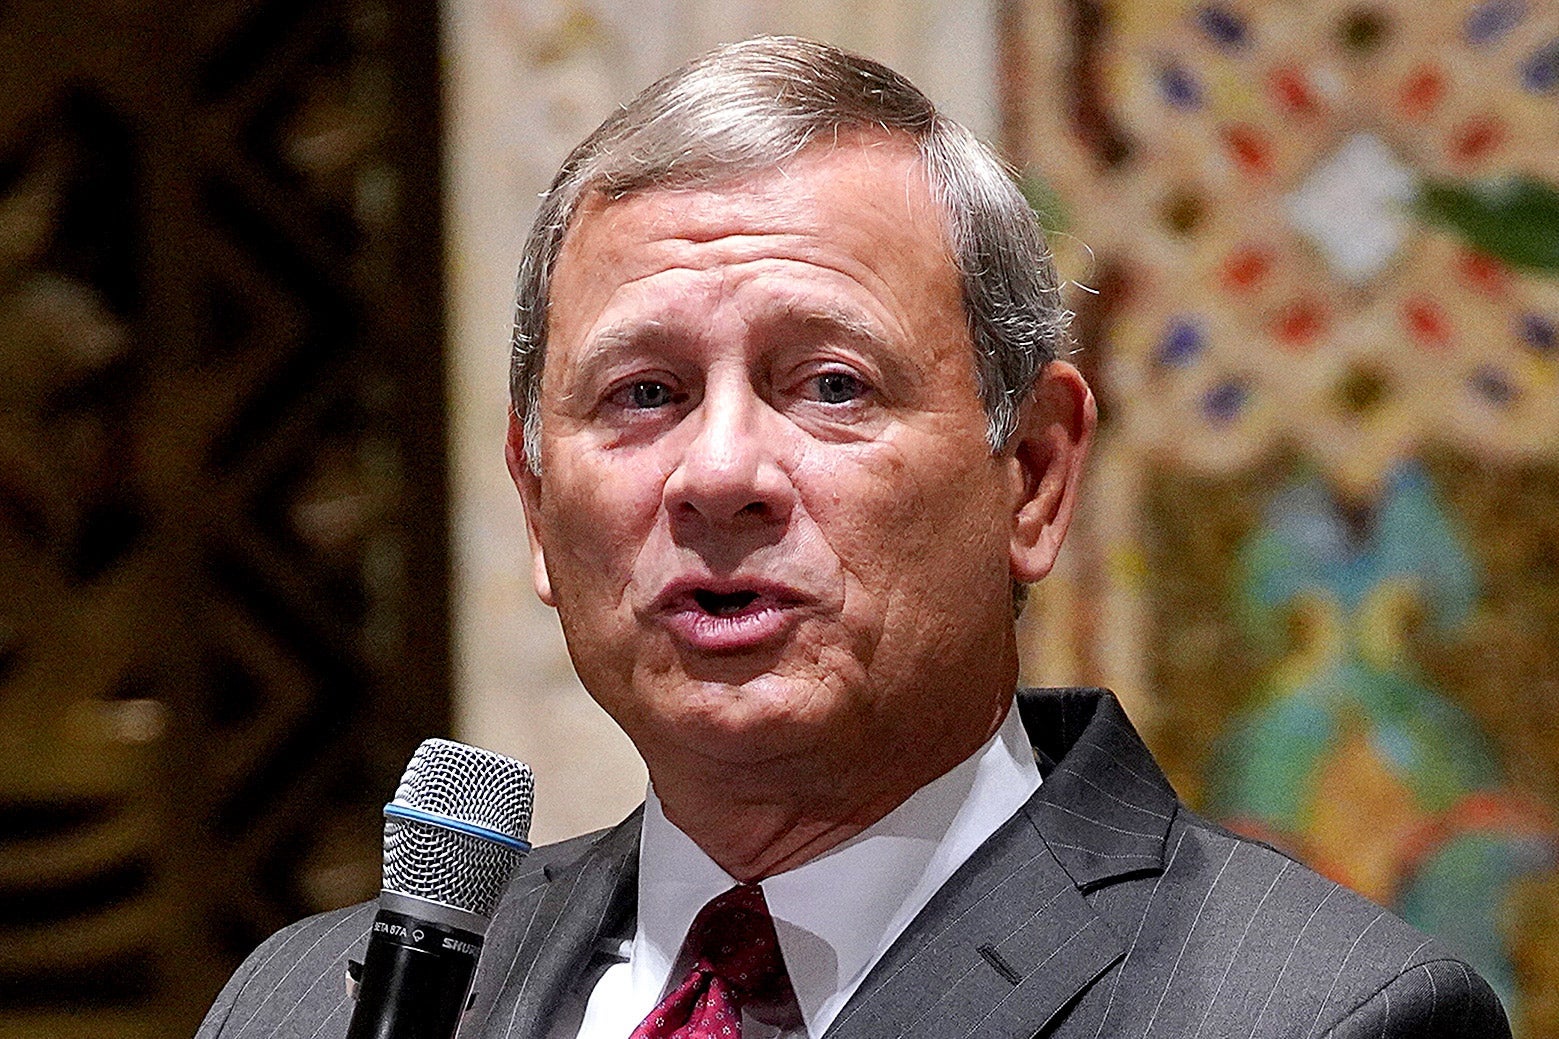 Roberts speaking into a microphone.